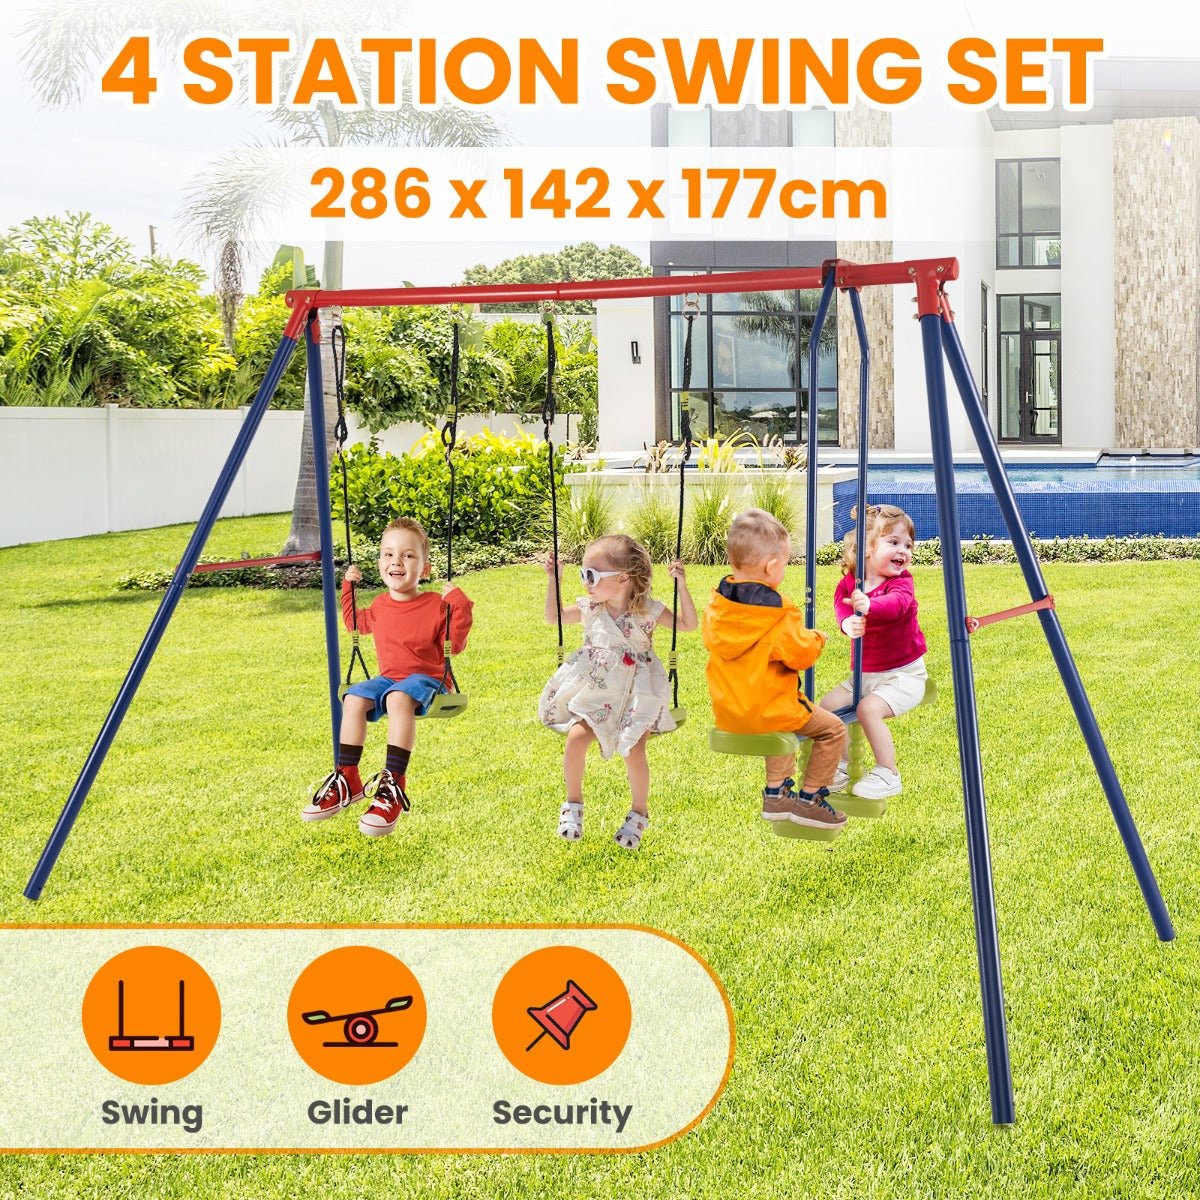 2-in-1 Swing Set: Adjustable Height for Active Outdoor Play